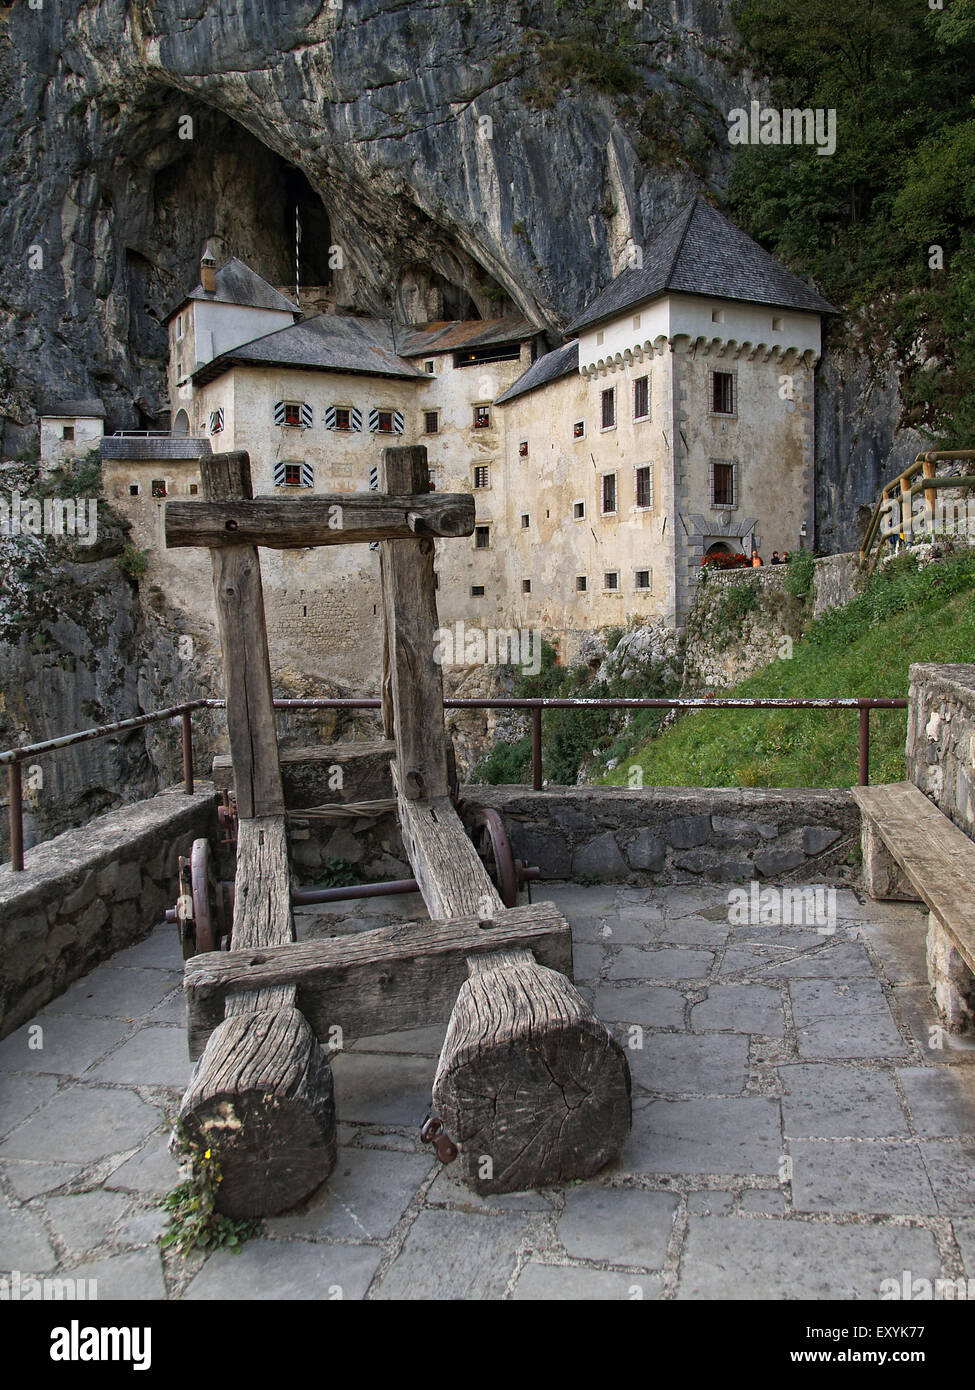 Wood catapult with Predjama castle, a renaissance castle built in a cave, at the background, near Postojna. Slovenia. Stock Photo